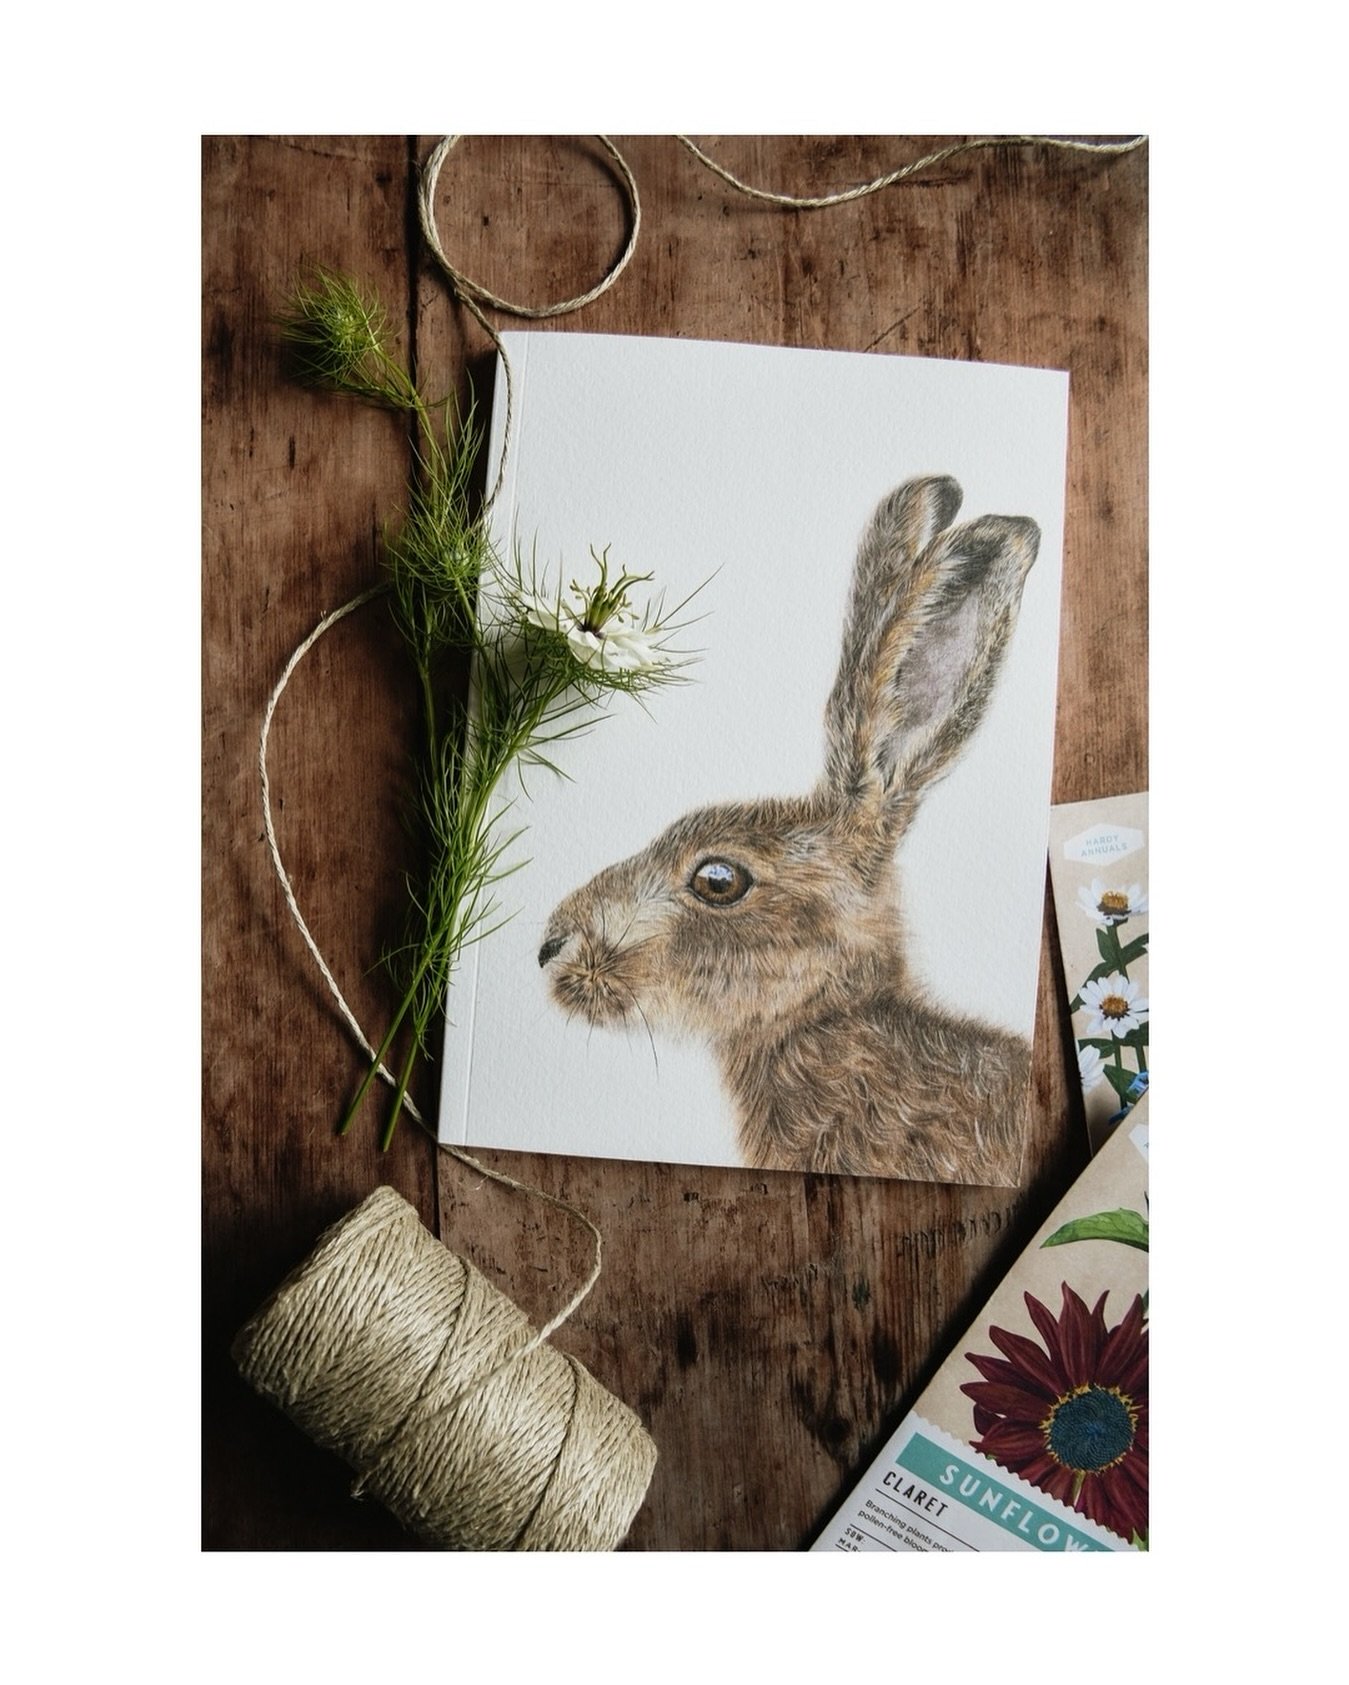 I&rsquo;ve had the pleasure of photographing all @rachel_grace_art&rsquo;s beautiful products ready for her website launch coming soon!

This hare notebook is one of my favourites, isn&rsquo;t she talented?

#pencilartist #hare #britishwildlife #brit